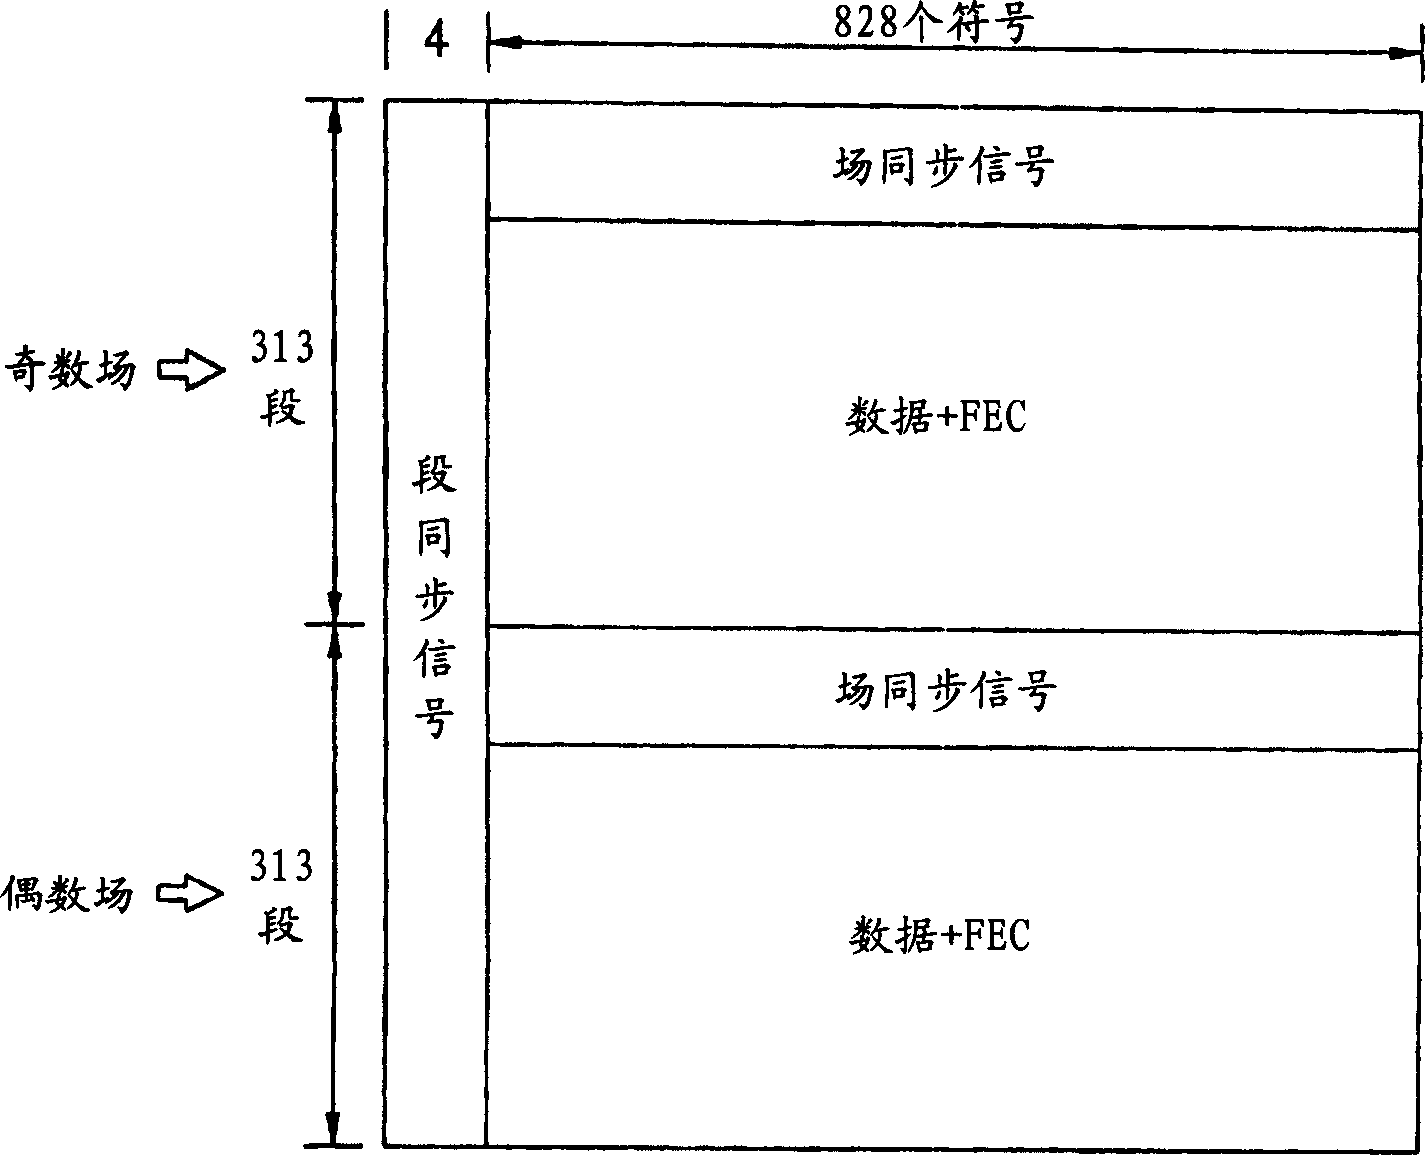 Channel balancer and digital TV receiver using the same